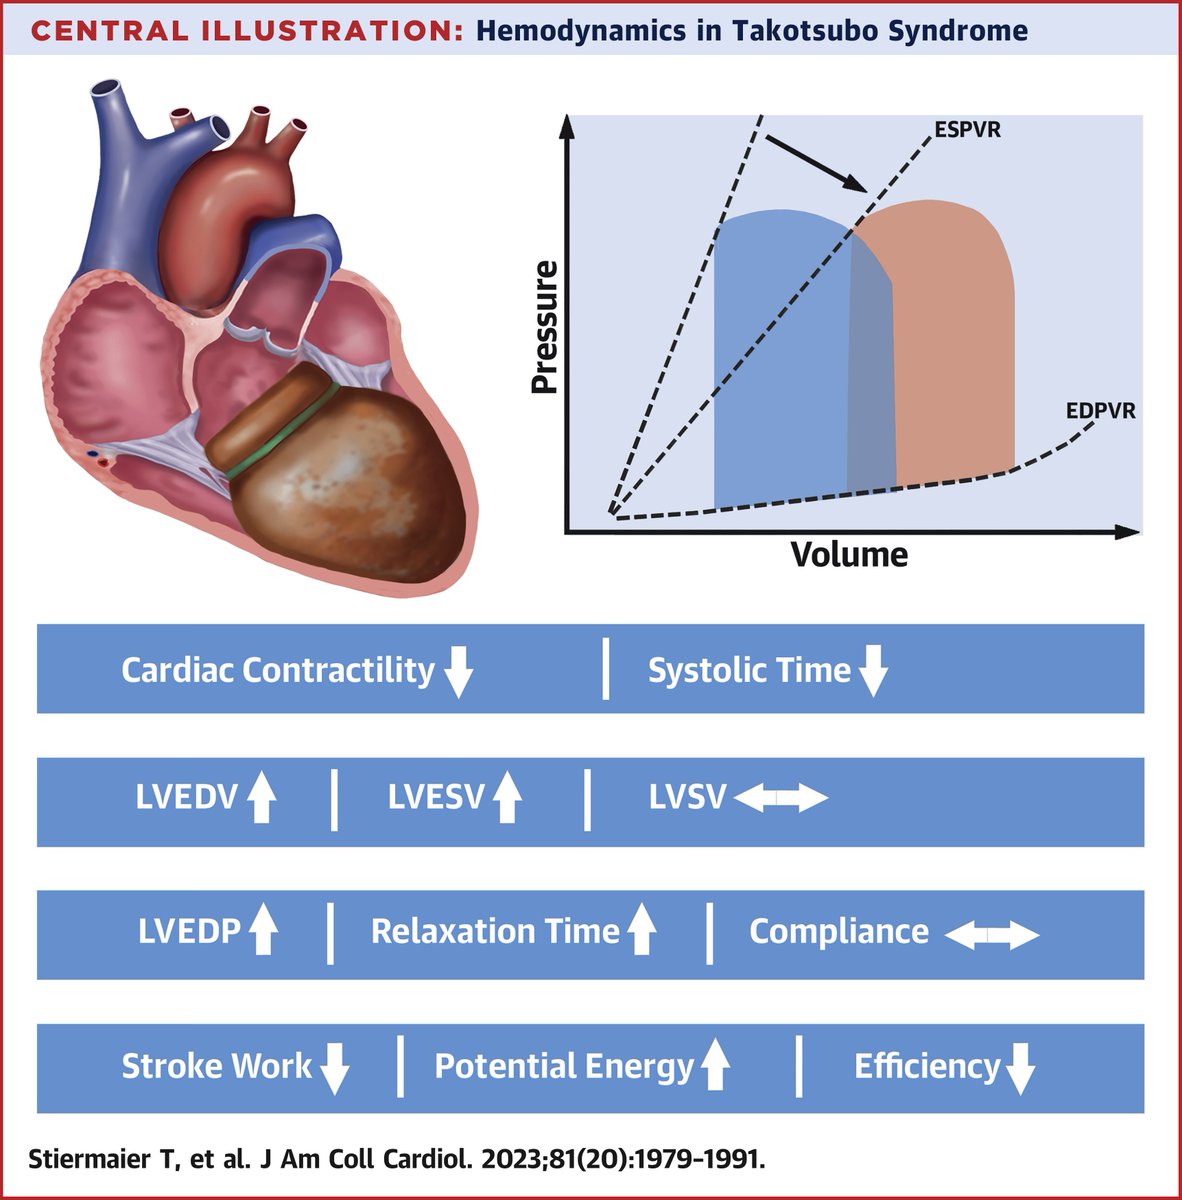 What cardiac hemodynamic abnormalities occur during the acute phase of takotsubo syndrome? Get the answer & learn more in #JACC: bit.ly/3pKufka #HeartFailure